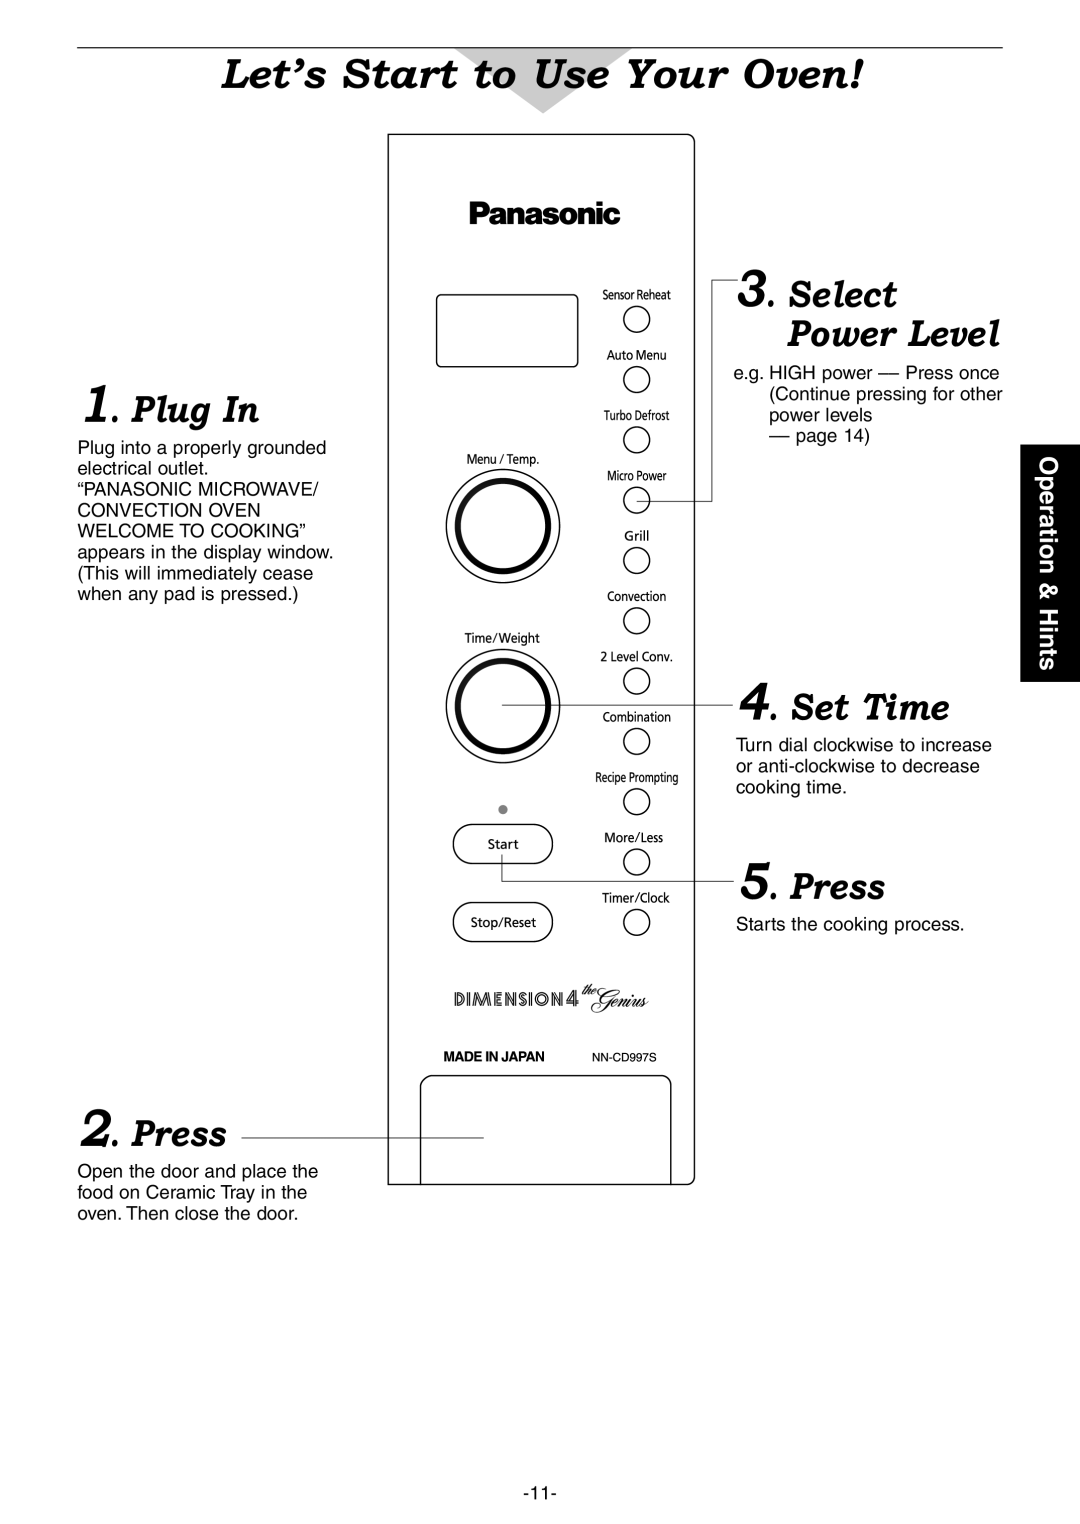 Panasonic NN-CD997S manual Let’s Start to Use Your Oven, Plug In, Press, Select Power Level, Set Time, Operation & Hints 